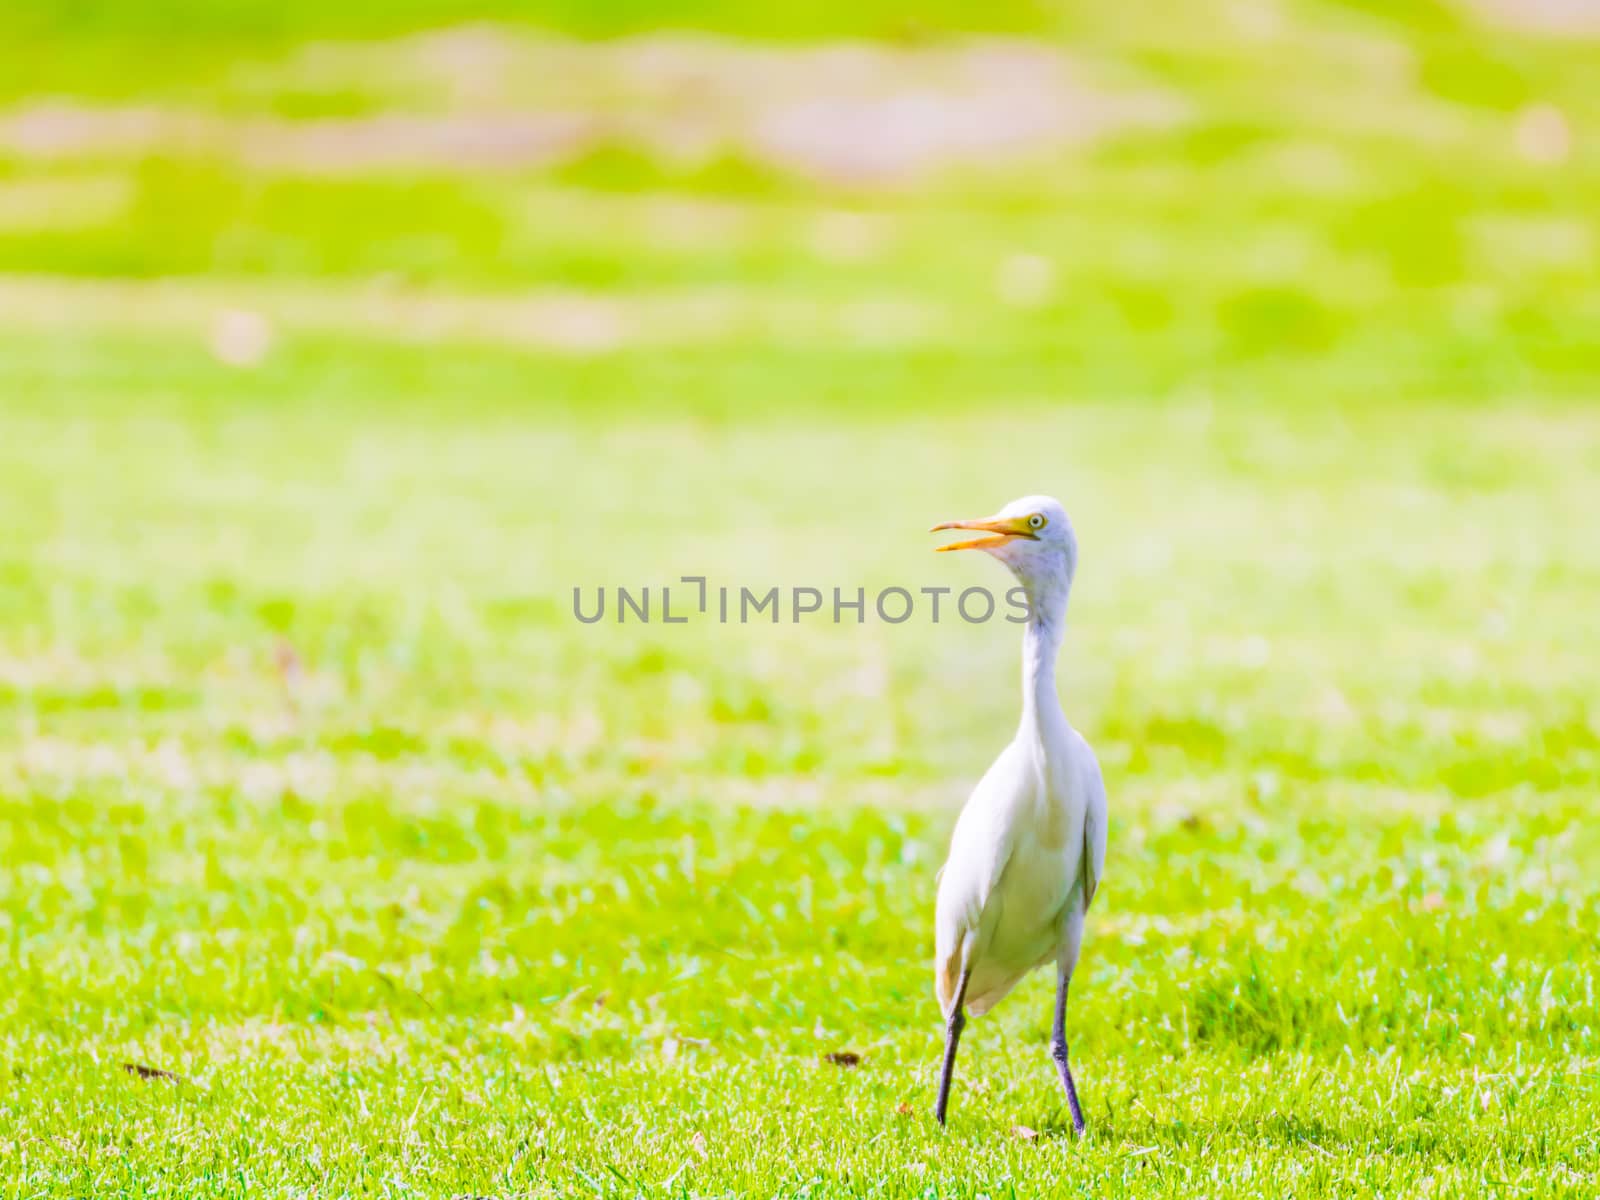 White egret in the park by pitchaphan